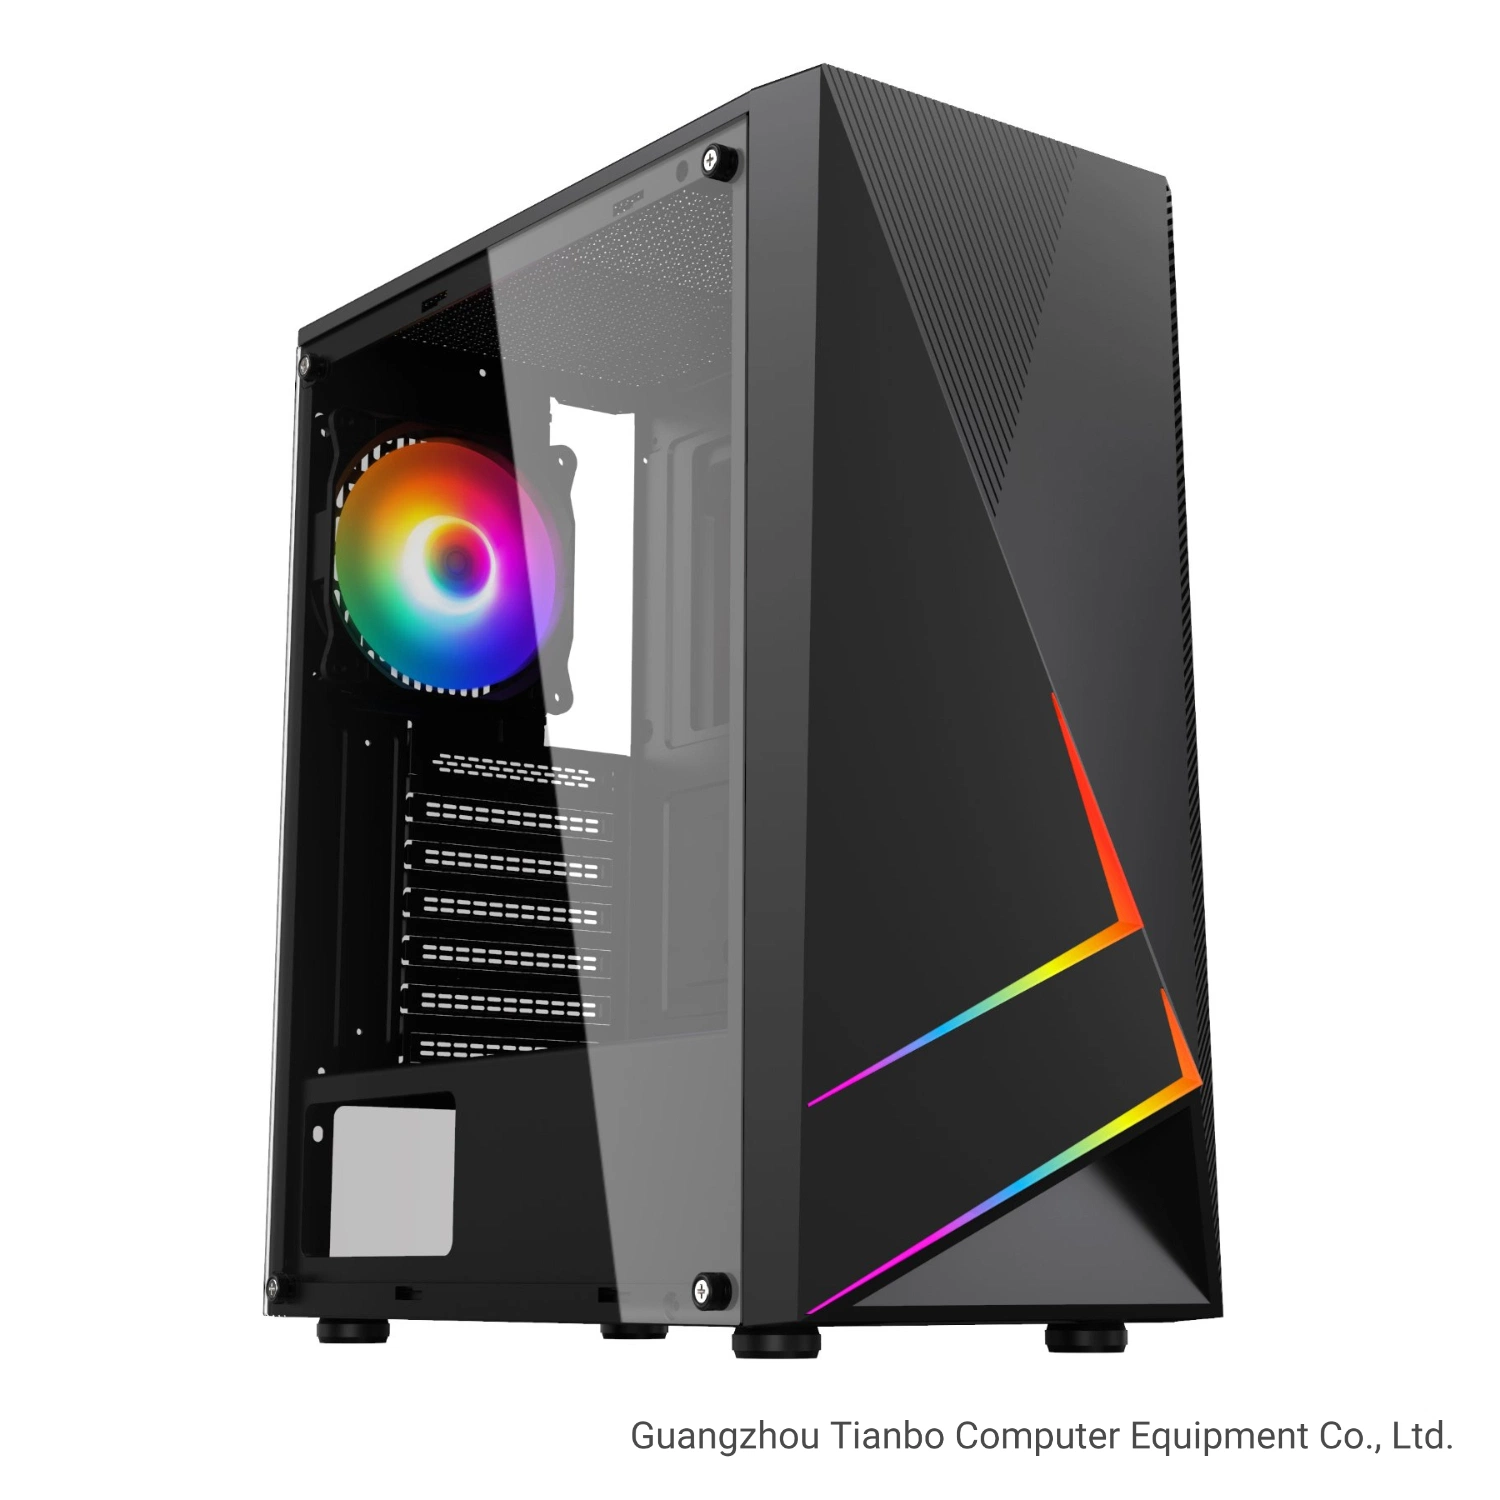 MID Tower ATX Computer Gaming Case with Peticular LED Strip Design PC Cases